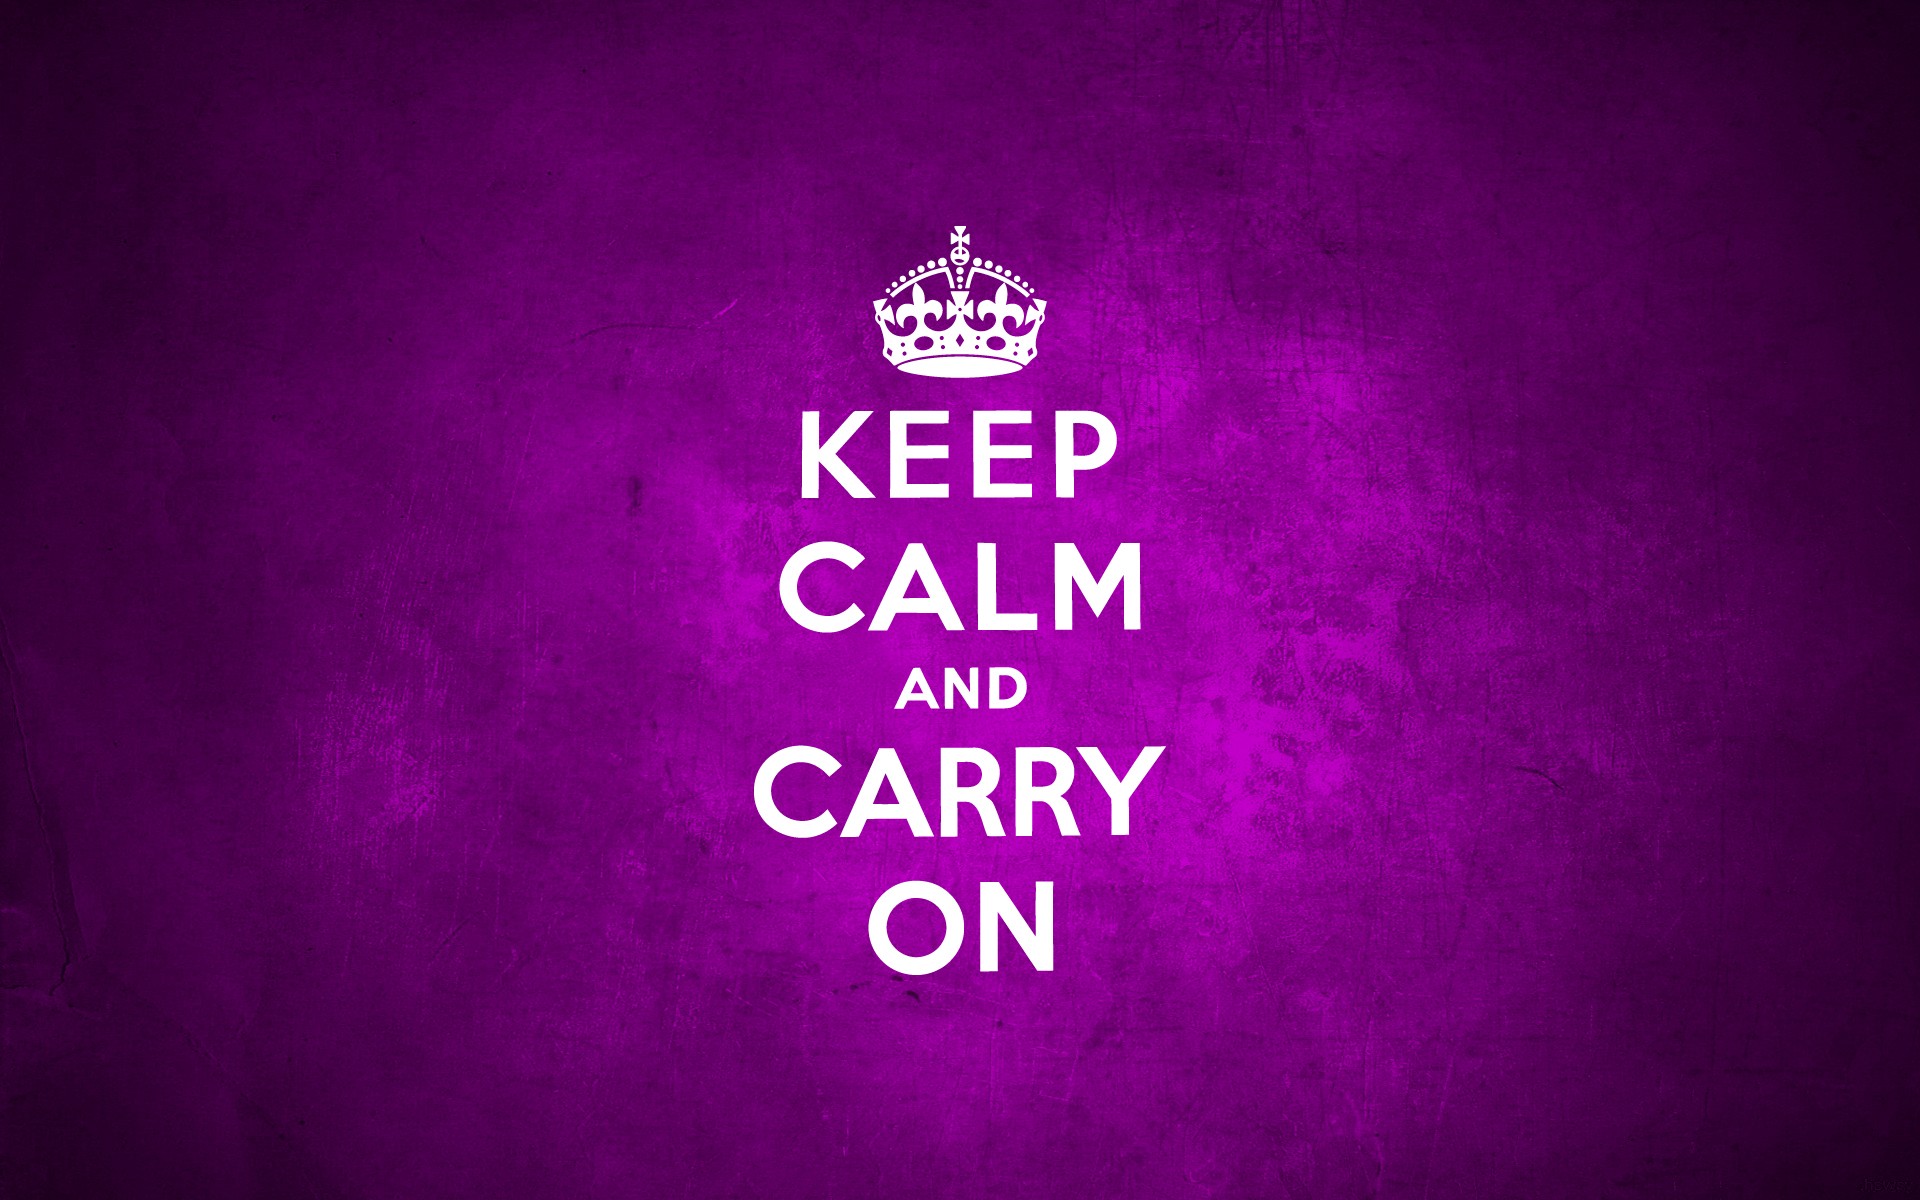 keep calm and carry on wallpaper,purple,violet,text,font,pink